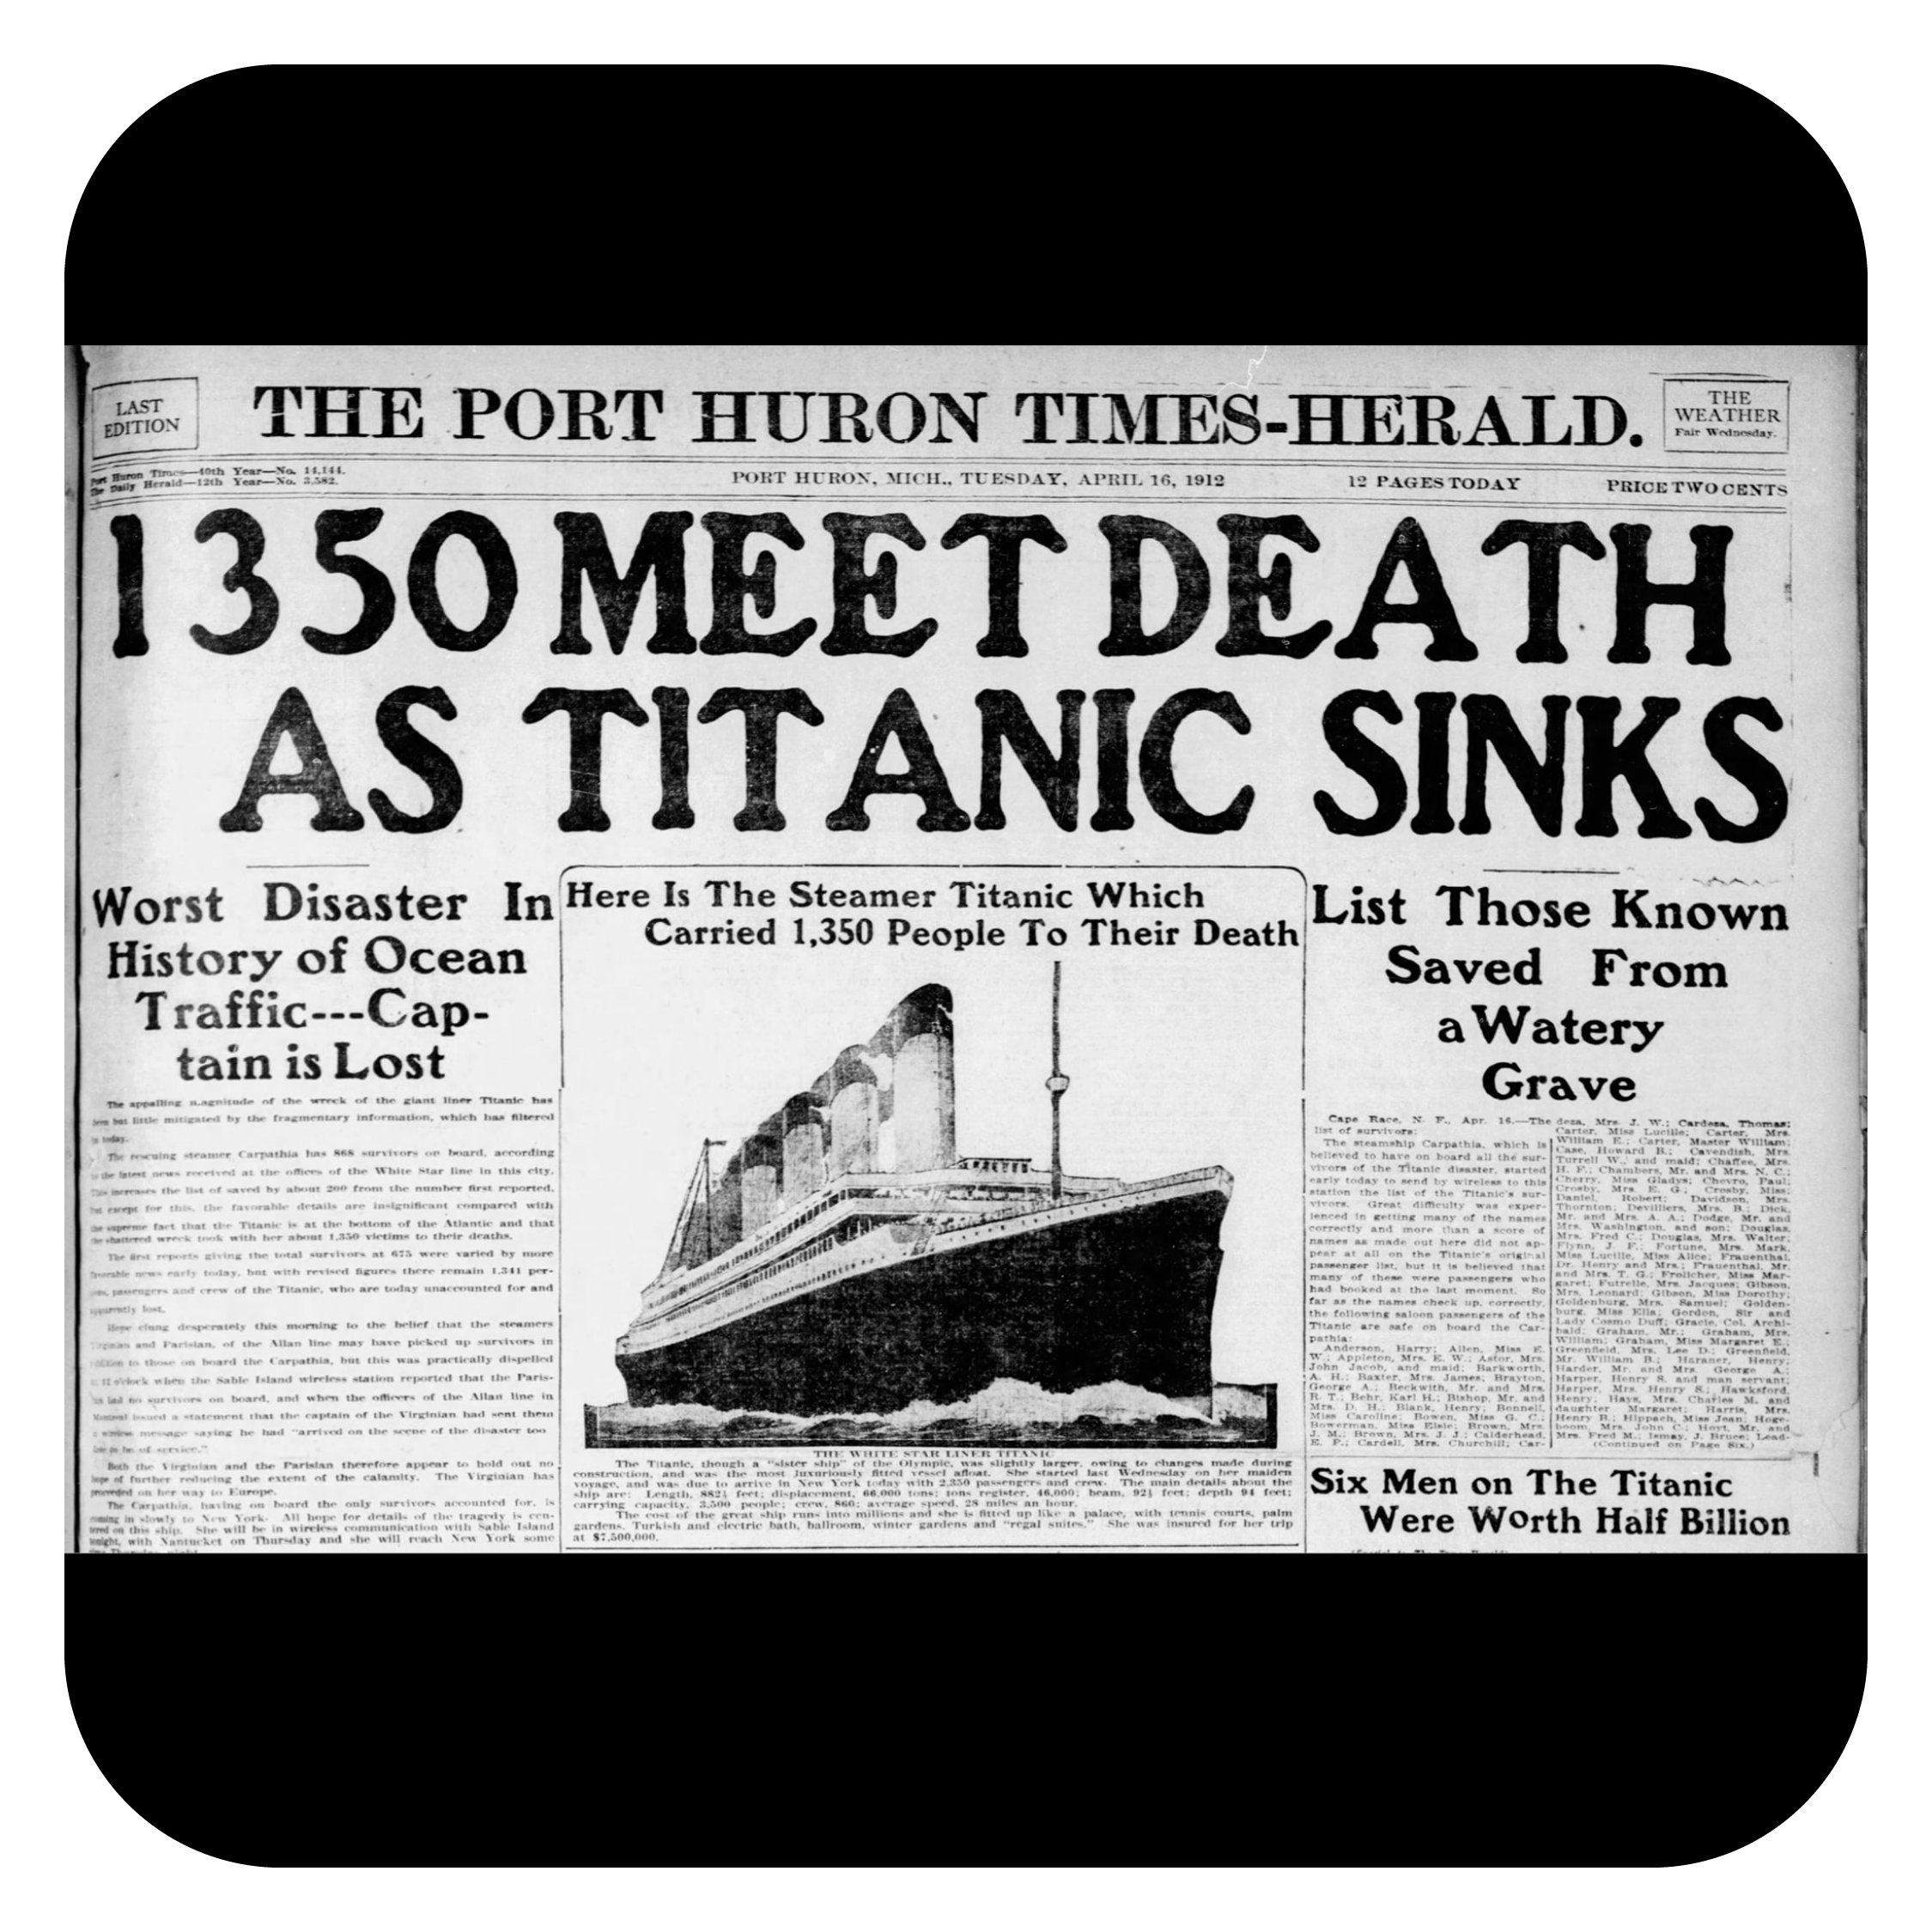 11:35 p.m. – Iceberg is spotted, but too late to avoid a collision 11:40 p.m. – Titanic strikes iceberg at a speed of 20.5 knots (23.6mph)